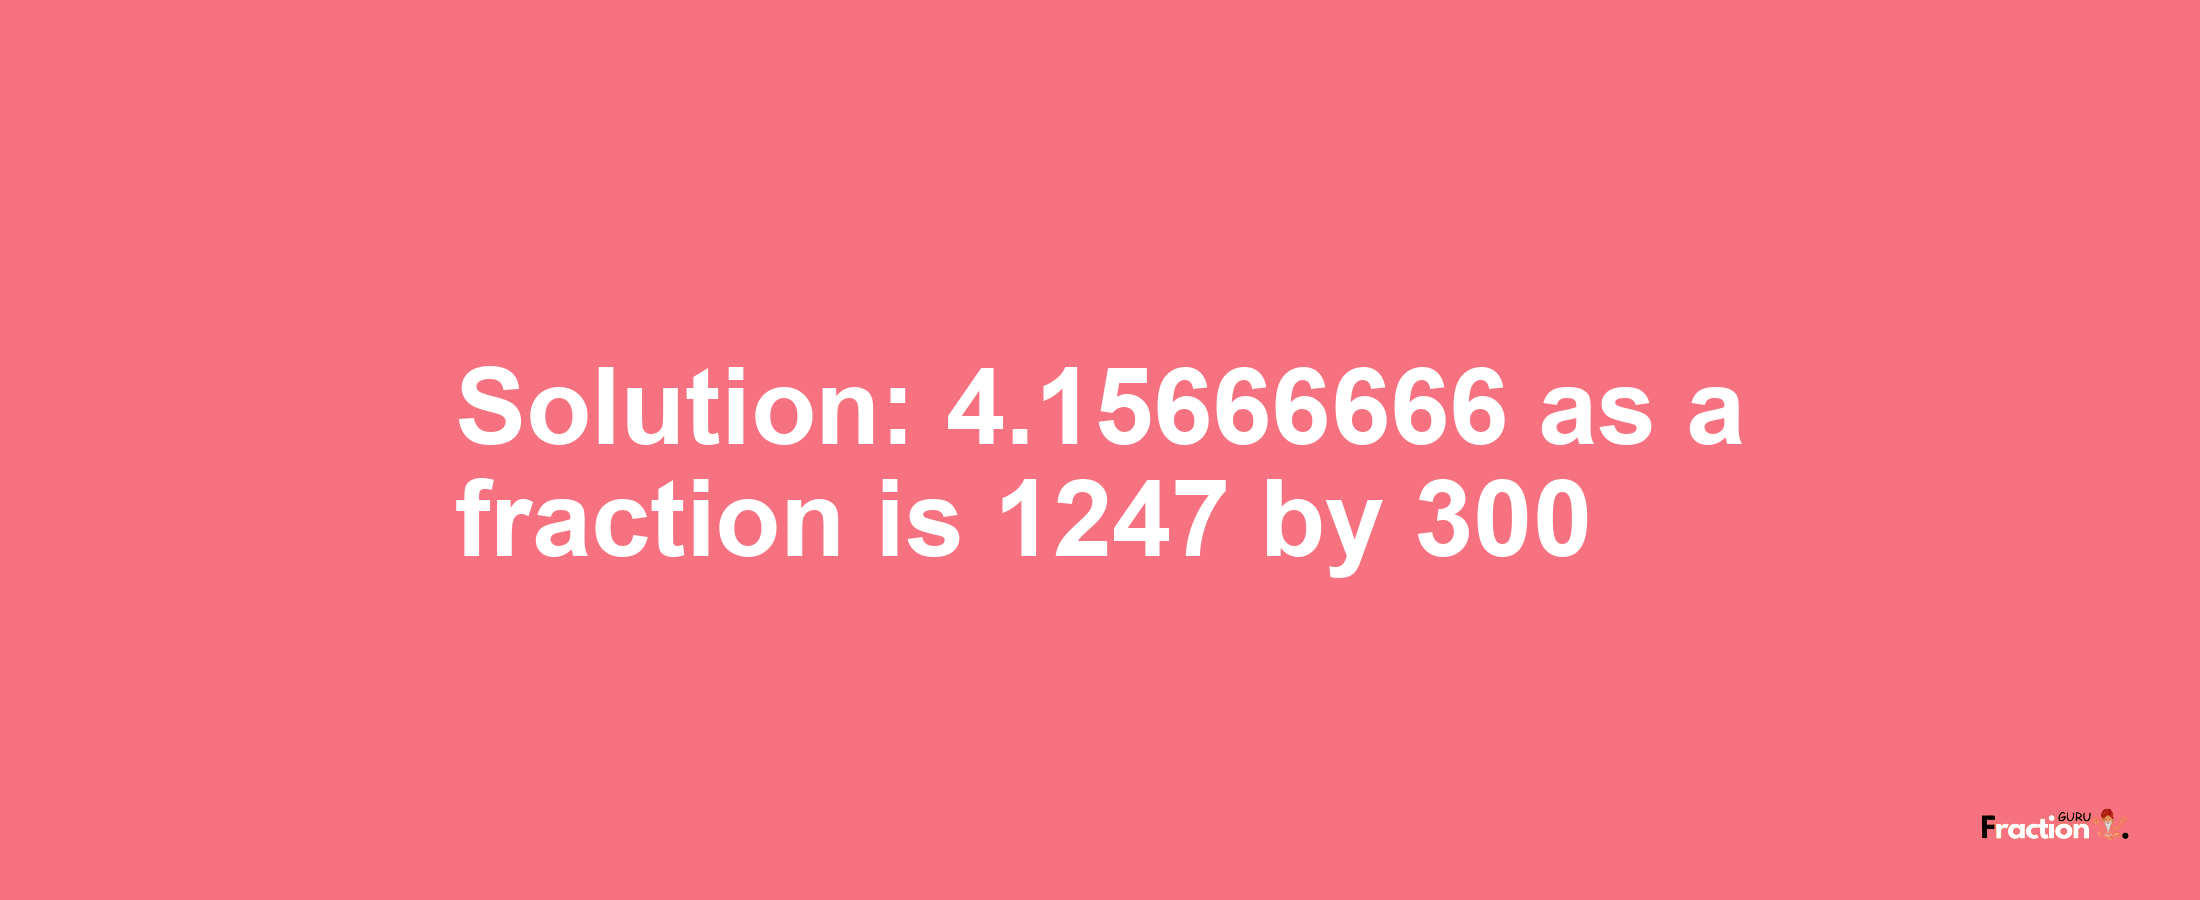 Solution:4.15666666 as a fraction is 1247/300